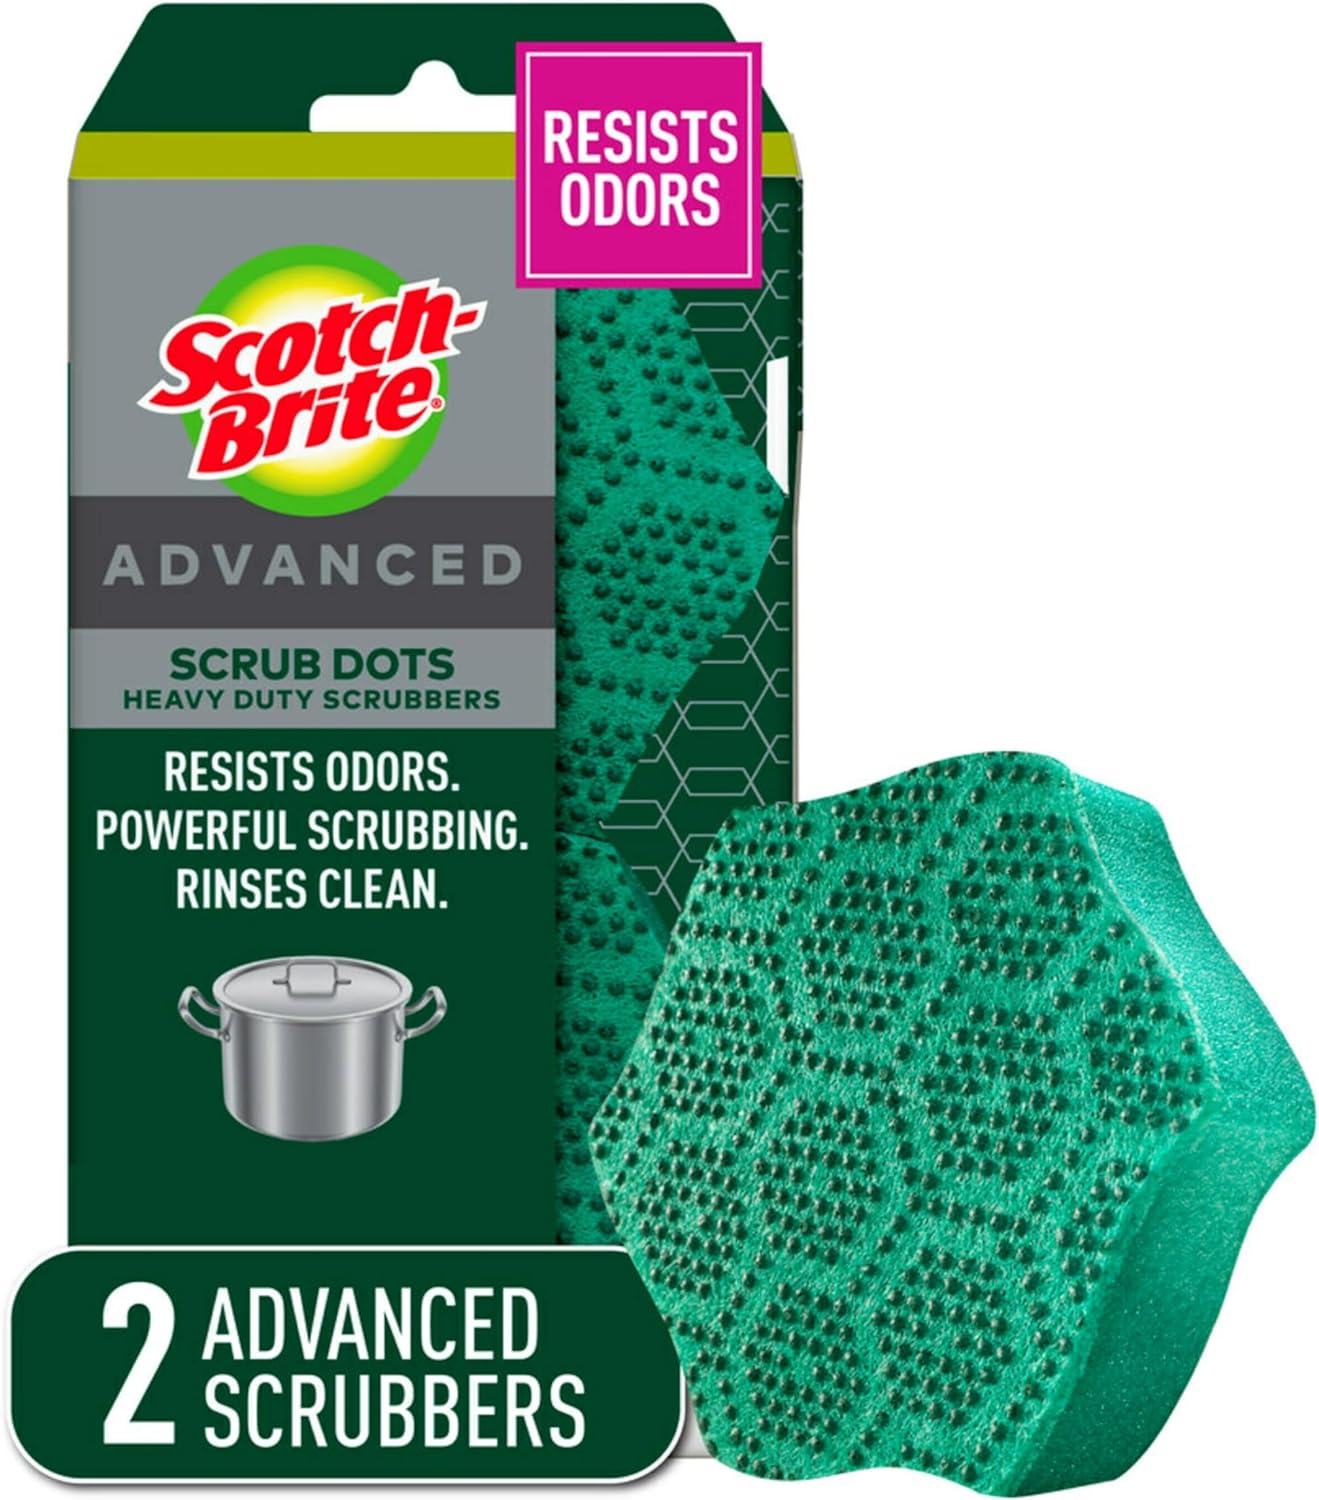 This sponge provides a significantly less habitable residence for colonizing microorganisms versus other I have used The inner spongy portion & outer abrasive top surface, are of a tighter density & texture, compared to traditional kitchen sponges. This translates to all the pros without the cons. Less trapping off food & particulates - means greater cleanliness & thus little sponge odor. The condensed texture not only still permits flexibility, but provides greater durability. I think thi